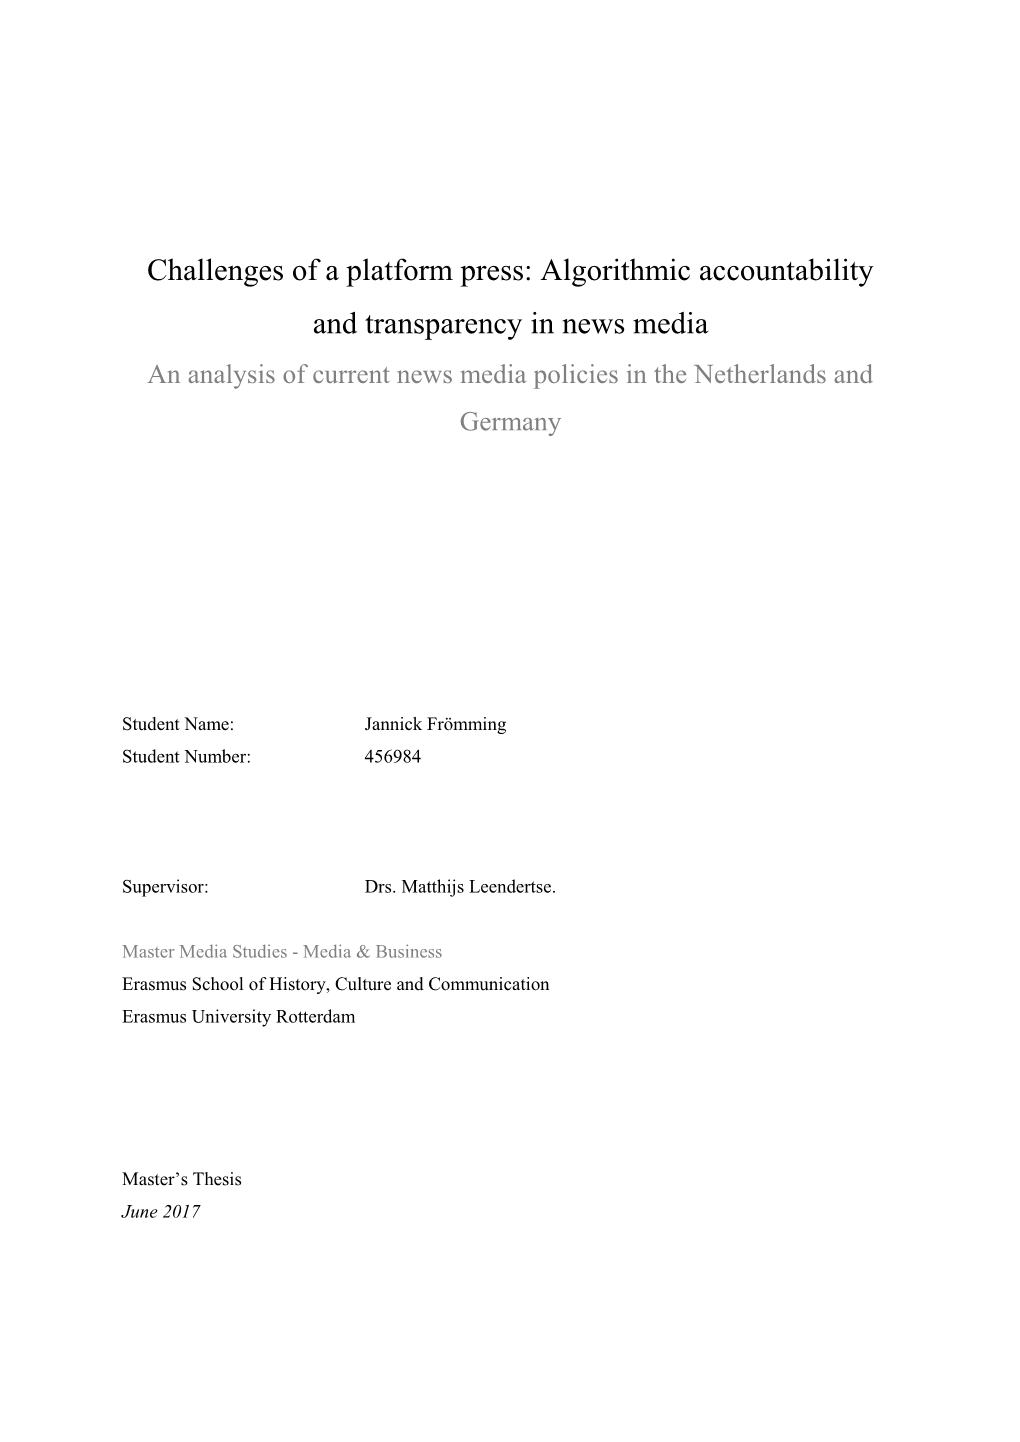 Algorithmic Accountability and Transparency in News Media